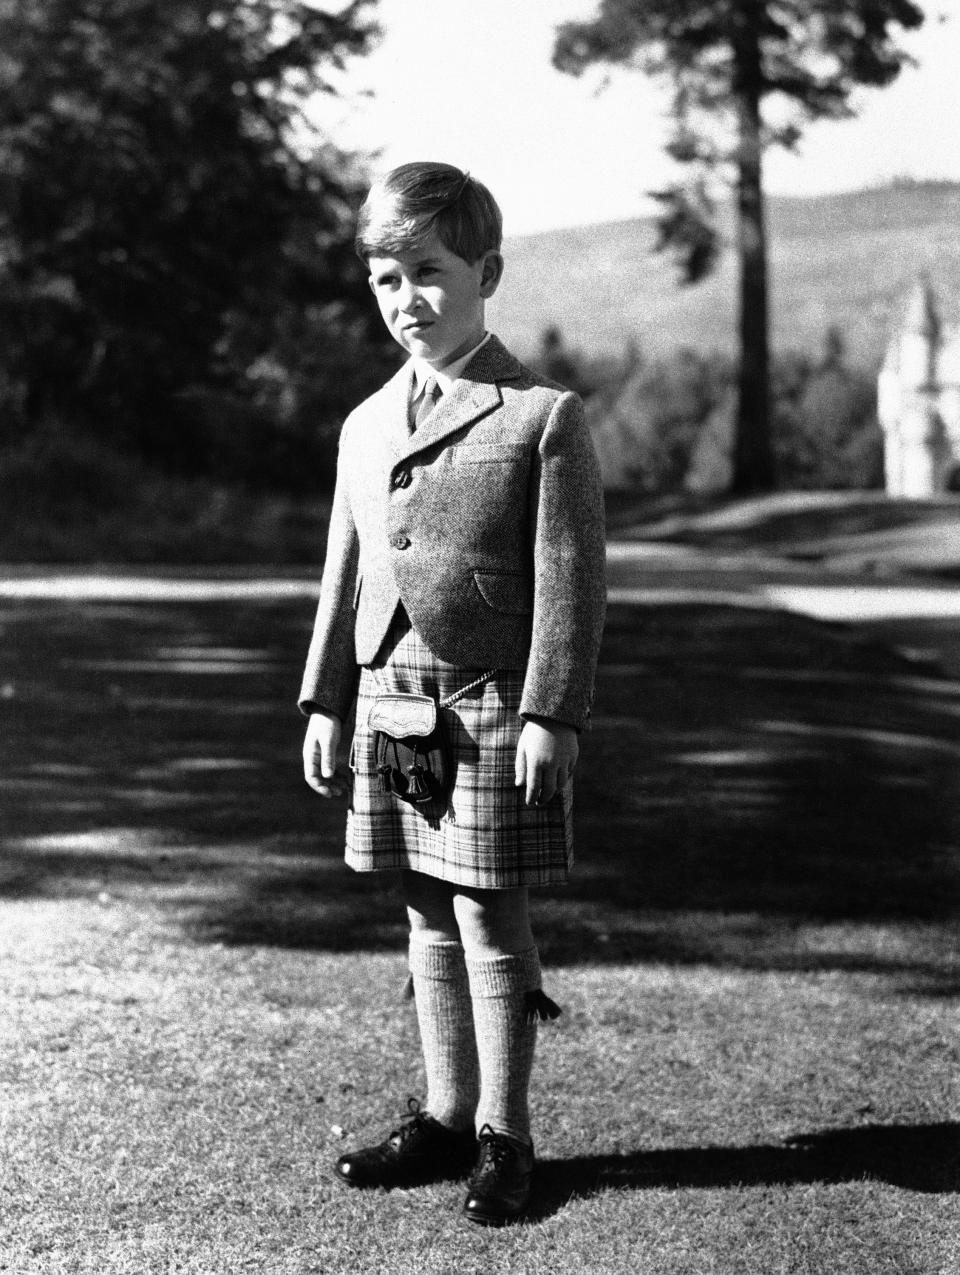 FILE - Britain's Prince Charles poses for a photo, wearing a kilt of Balmoral Tartan on the grounds of Balmoral Castle, in Balmoral, Scotland, Nov. 12, 1955. After waiting 74 years to become king, Charles has used his first six months on the throne to meet faith leaders across the country, reshuffle royal residences and stage his first overseas state visit. With the coronation just weeks away, Charles and the Buckingham Palace machine are working at top speed to show the new king at work. (AP Photo, File)